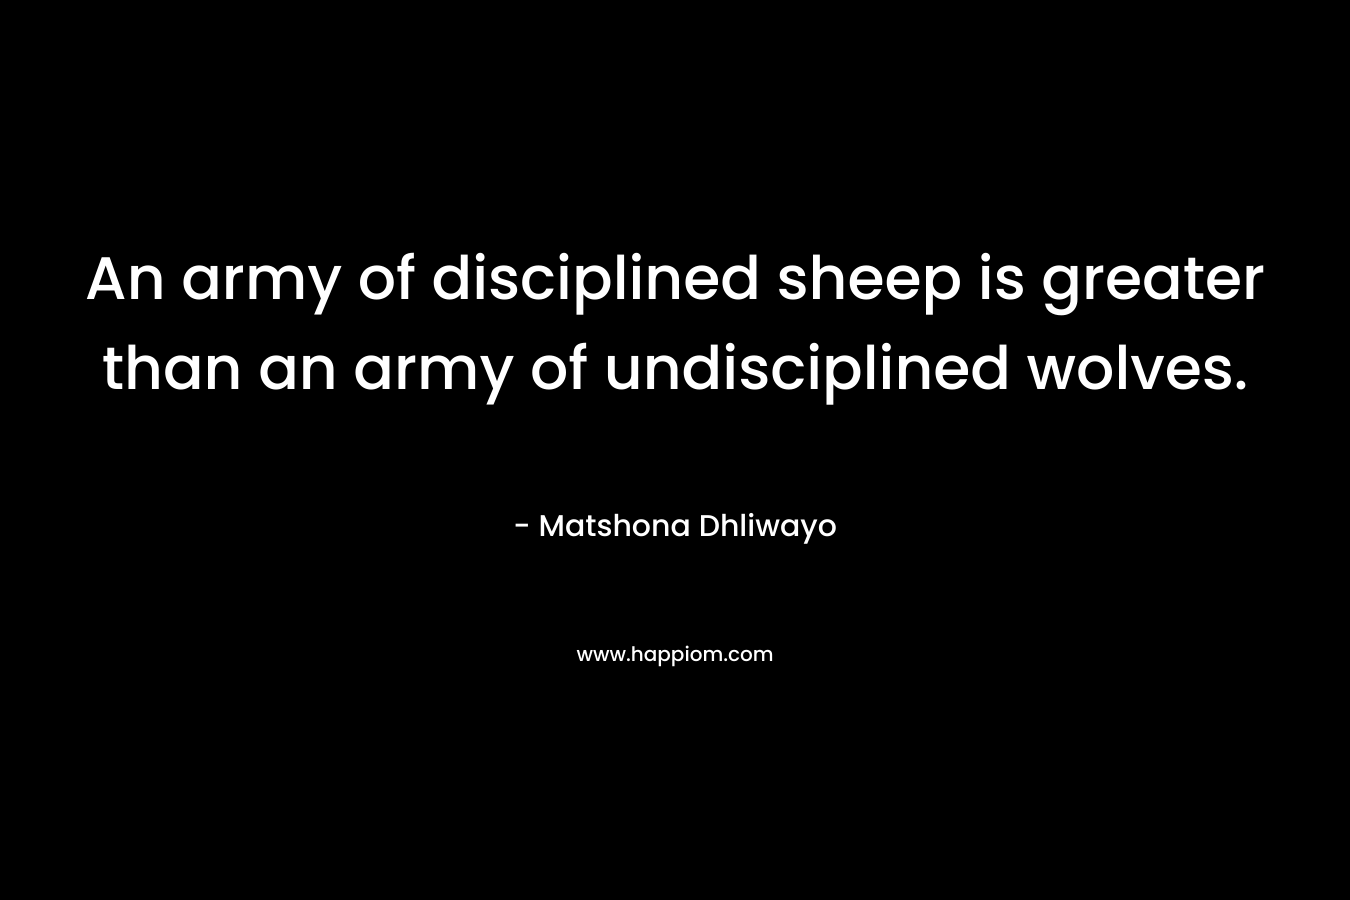 An army of disciplined sheep is greater than an army of undisciplined wolves.